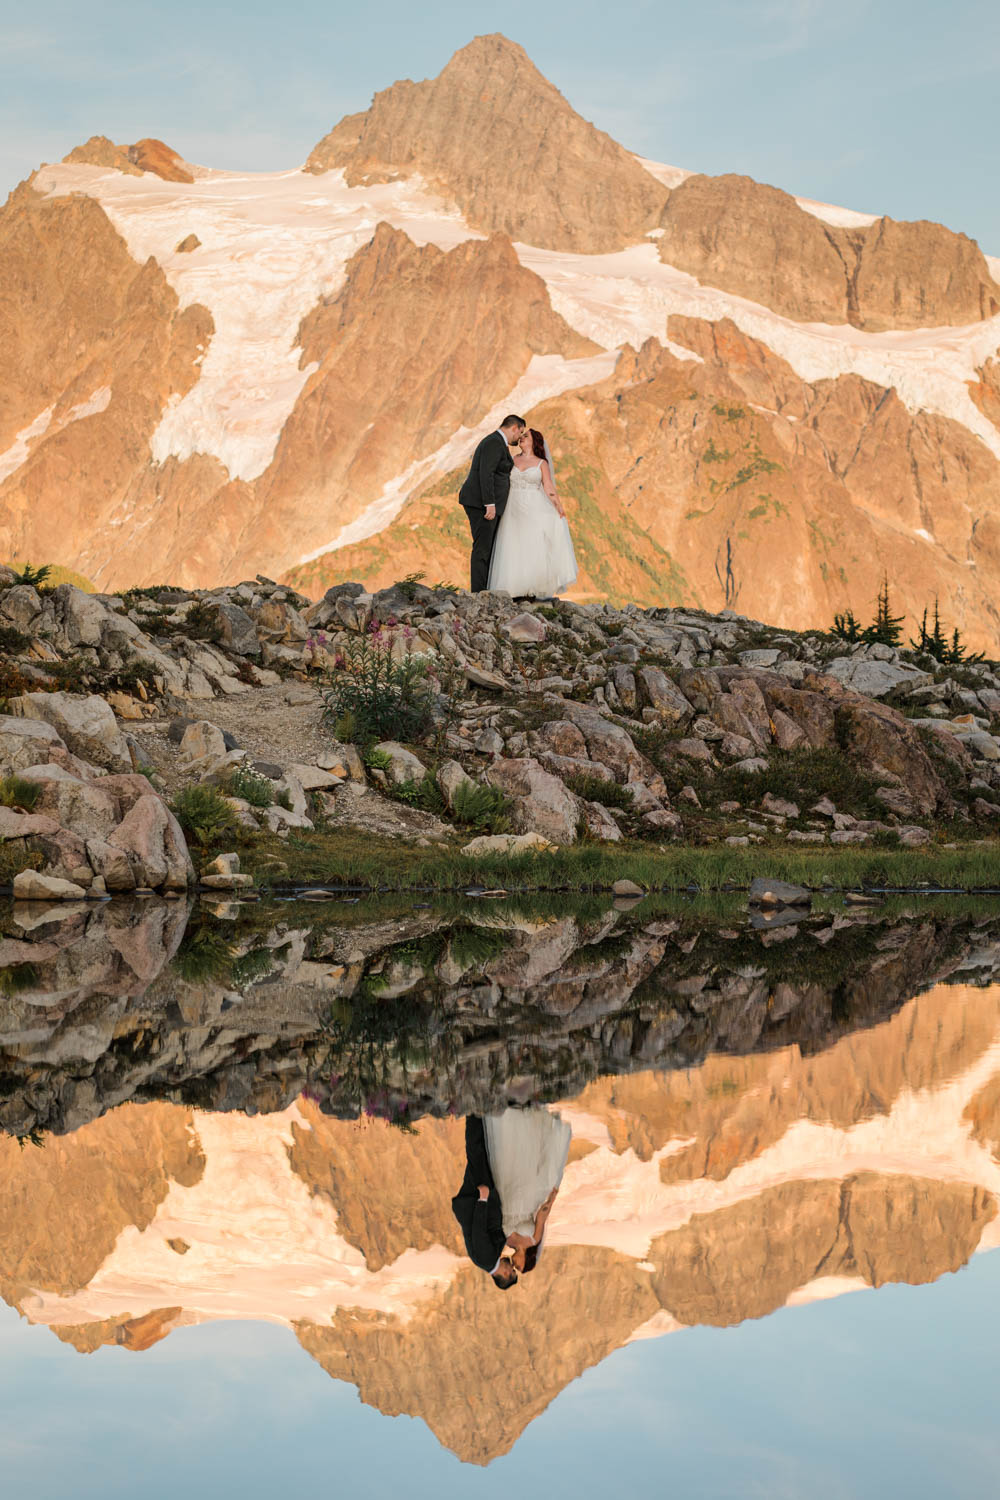 A couple in wedding attire hug with mountains and a lake